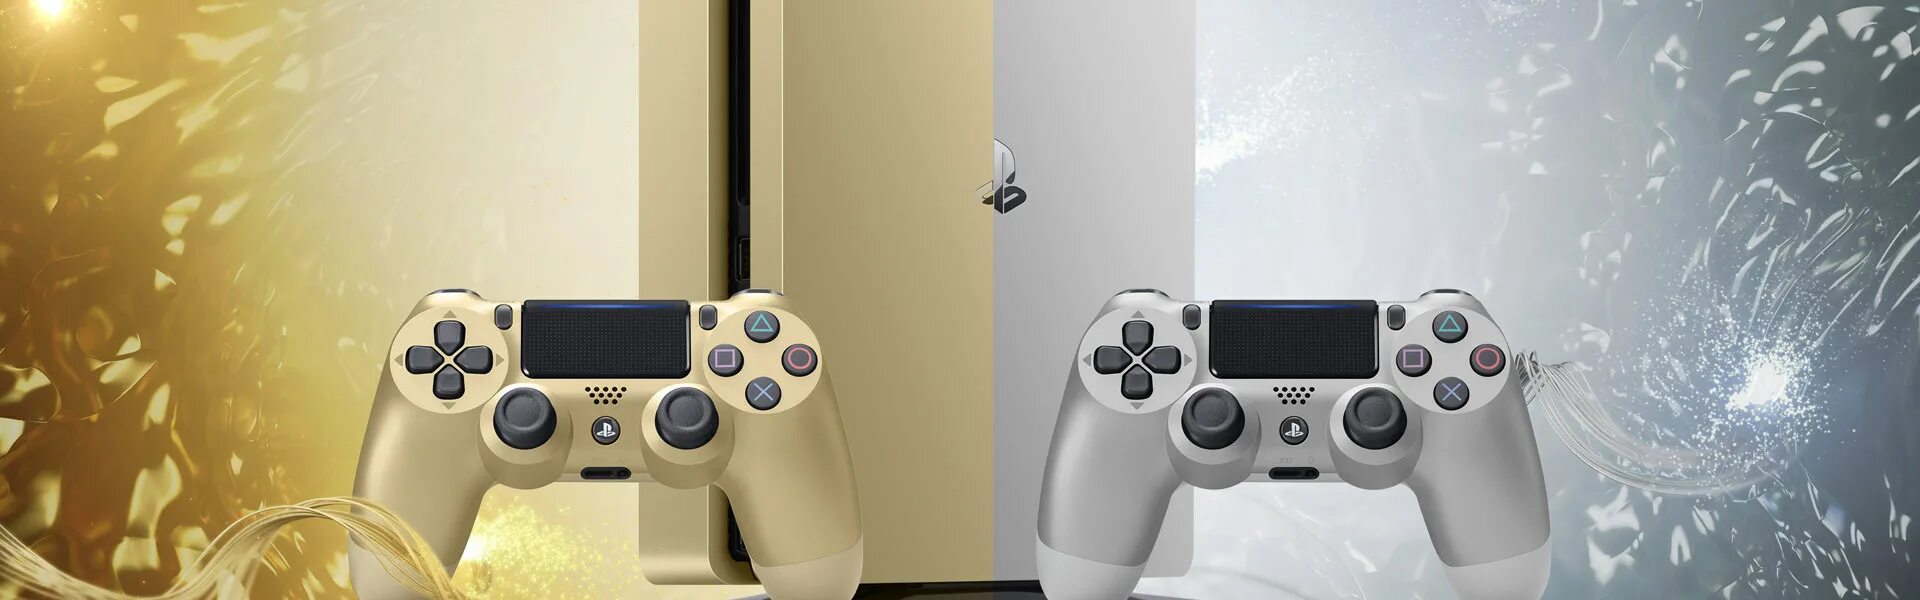 Ps4 gold edition. Ps4 Silver. Sony Gold ps4 Limited Edition. Ps4 серебристая. PLAYSTATION 4 красивые фото.